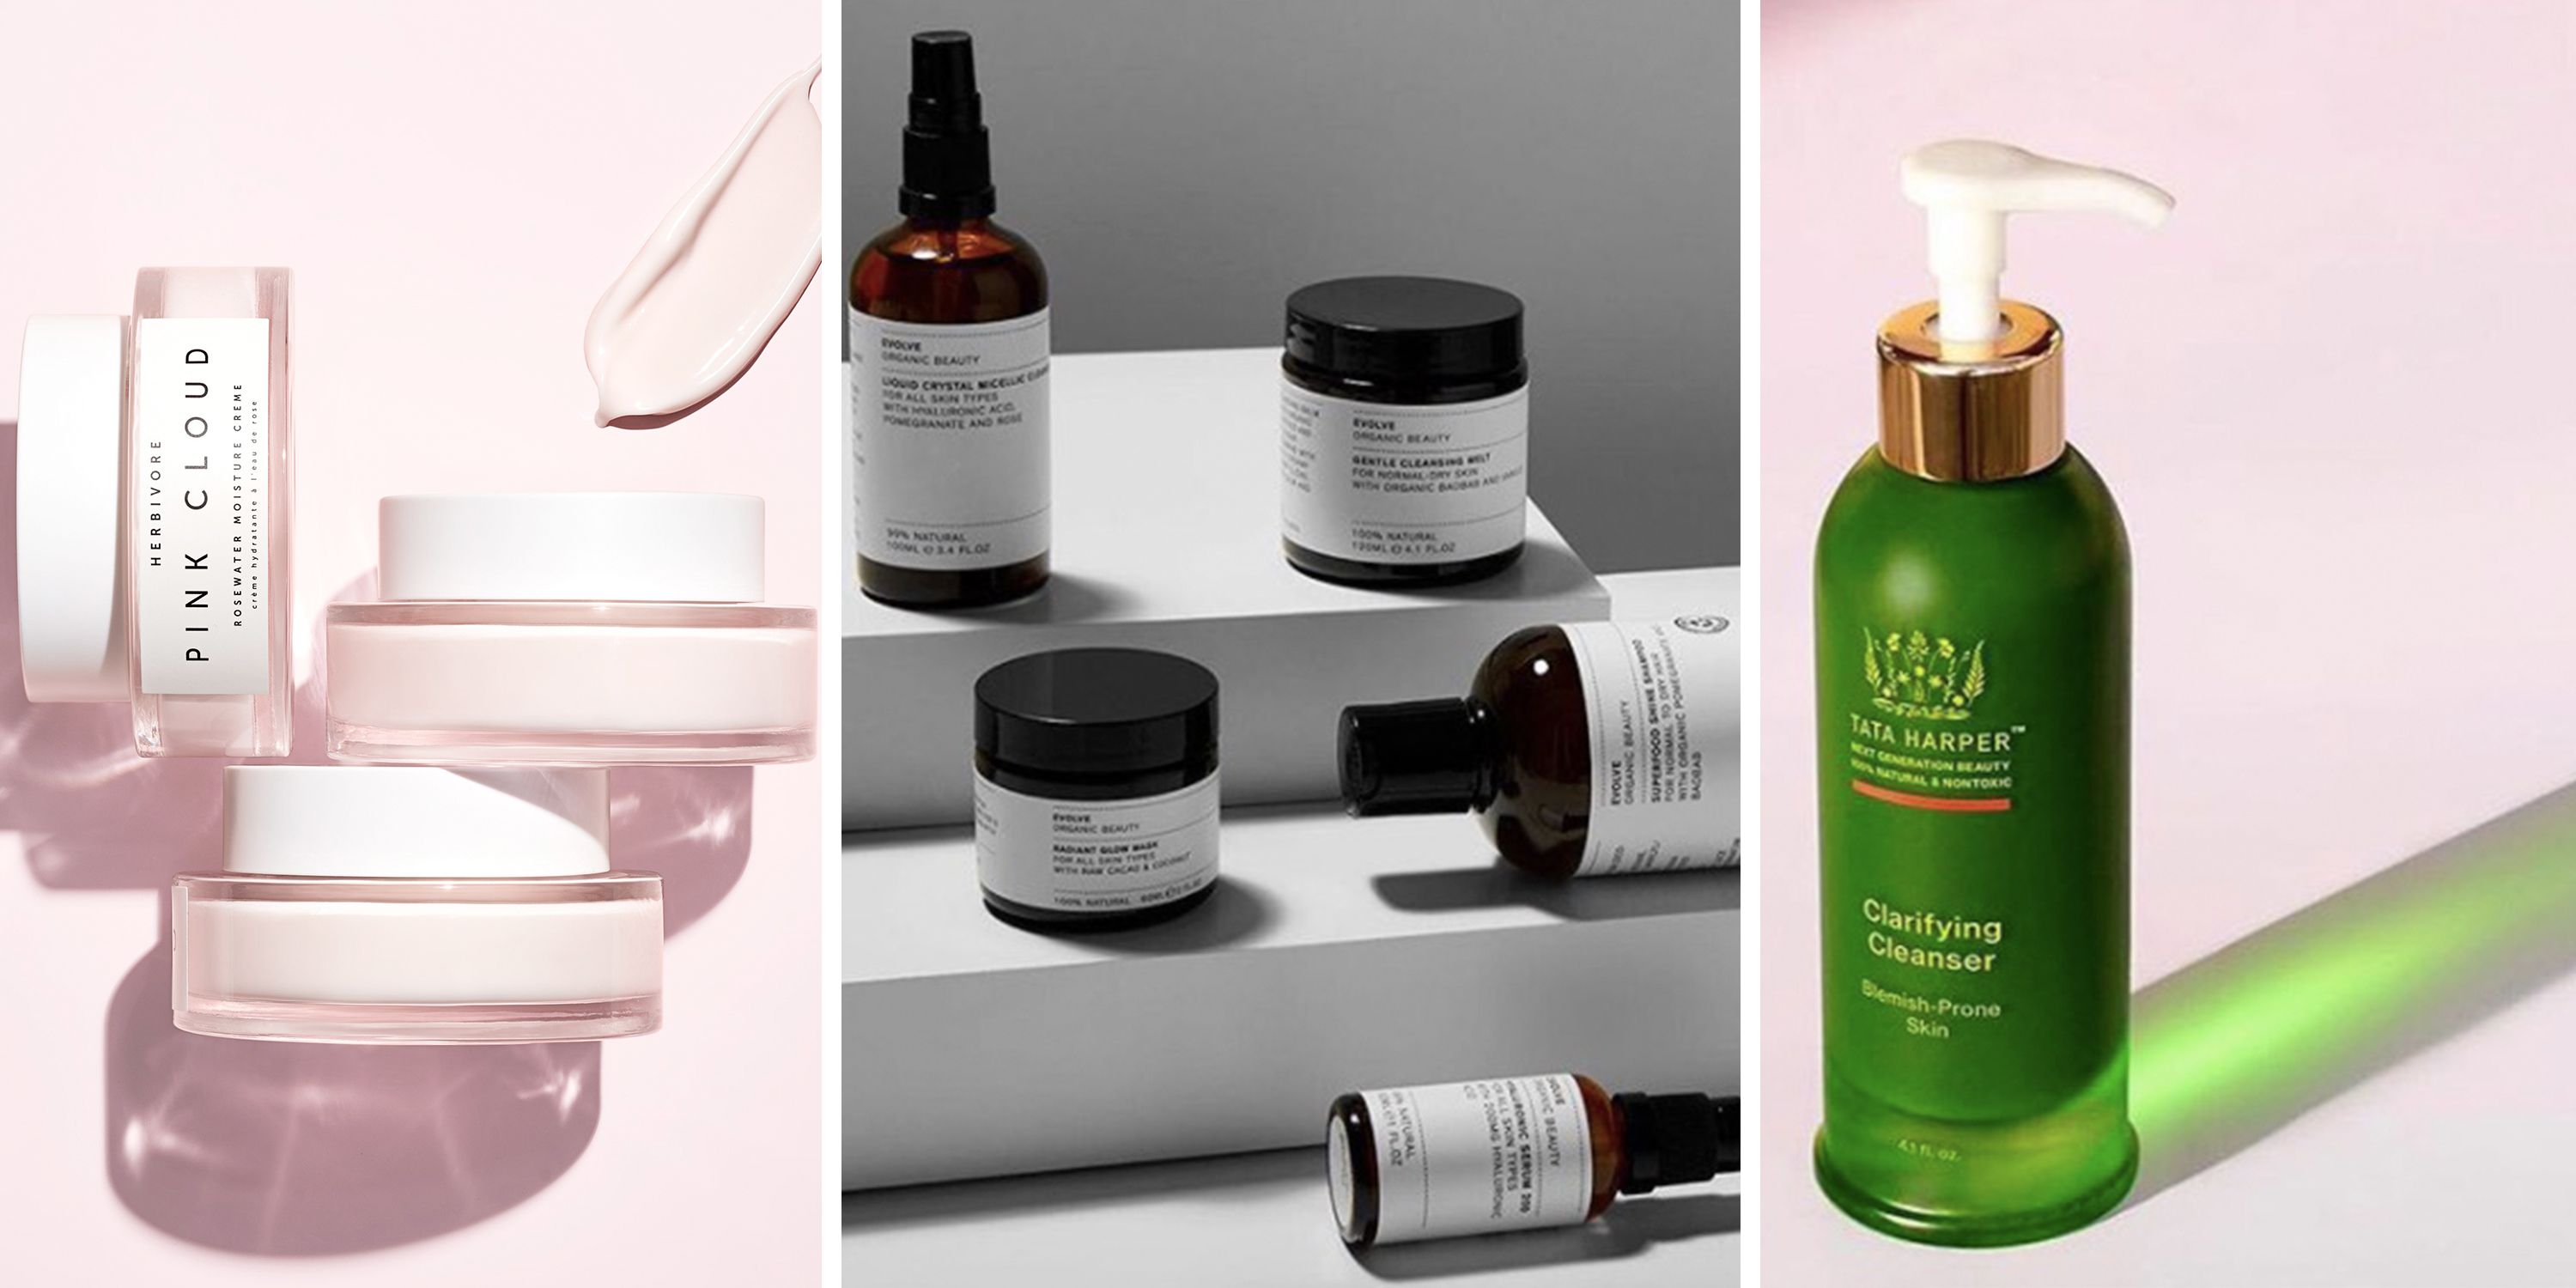 13 Best Natural & Organic Skincare Products - Non-Toxic and Chemical-Free